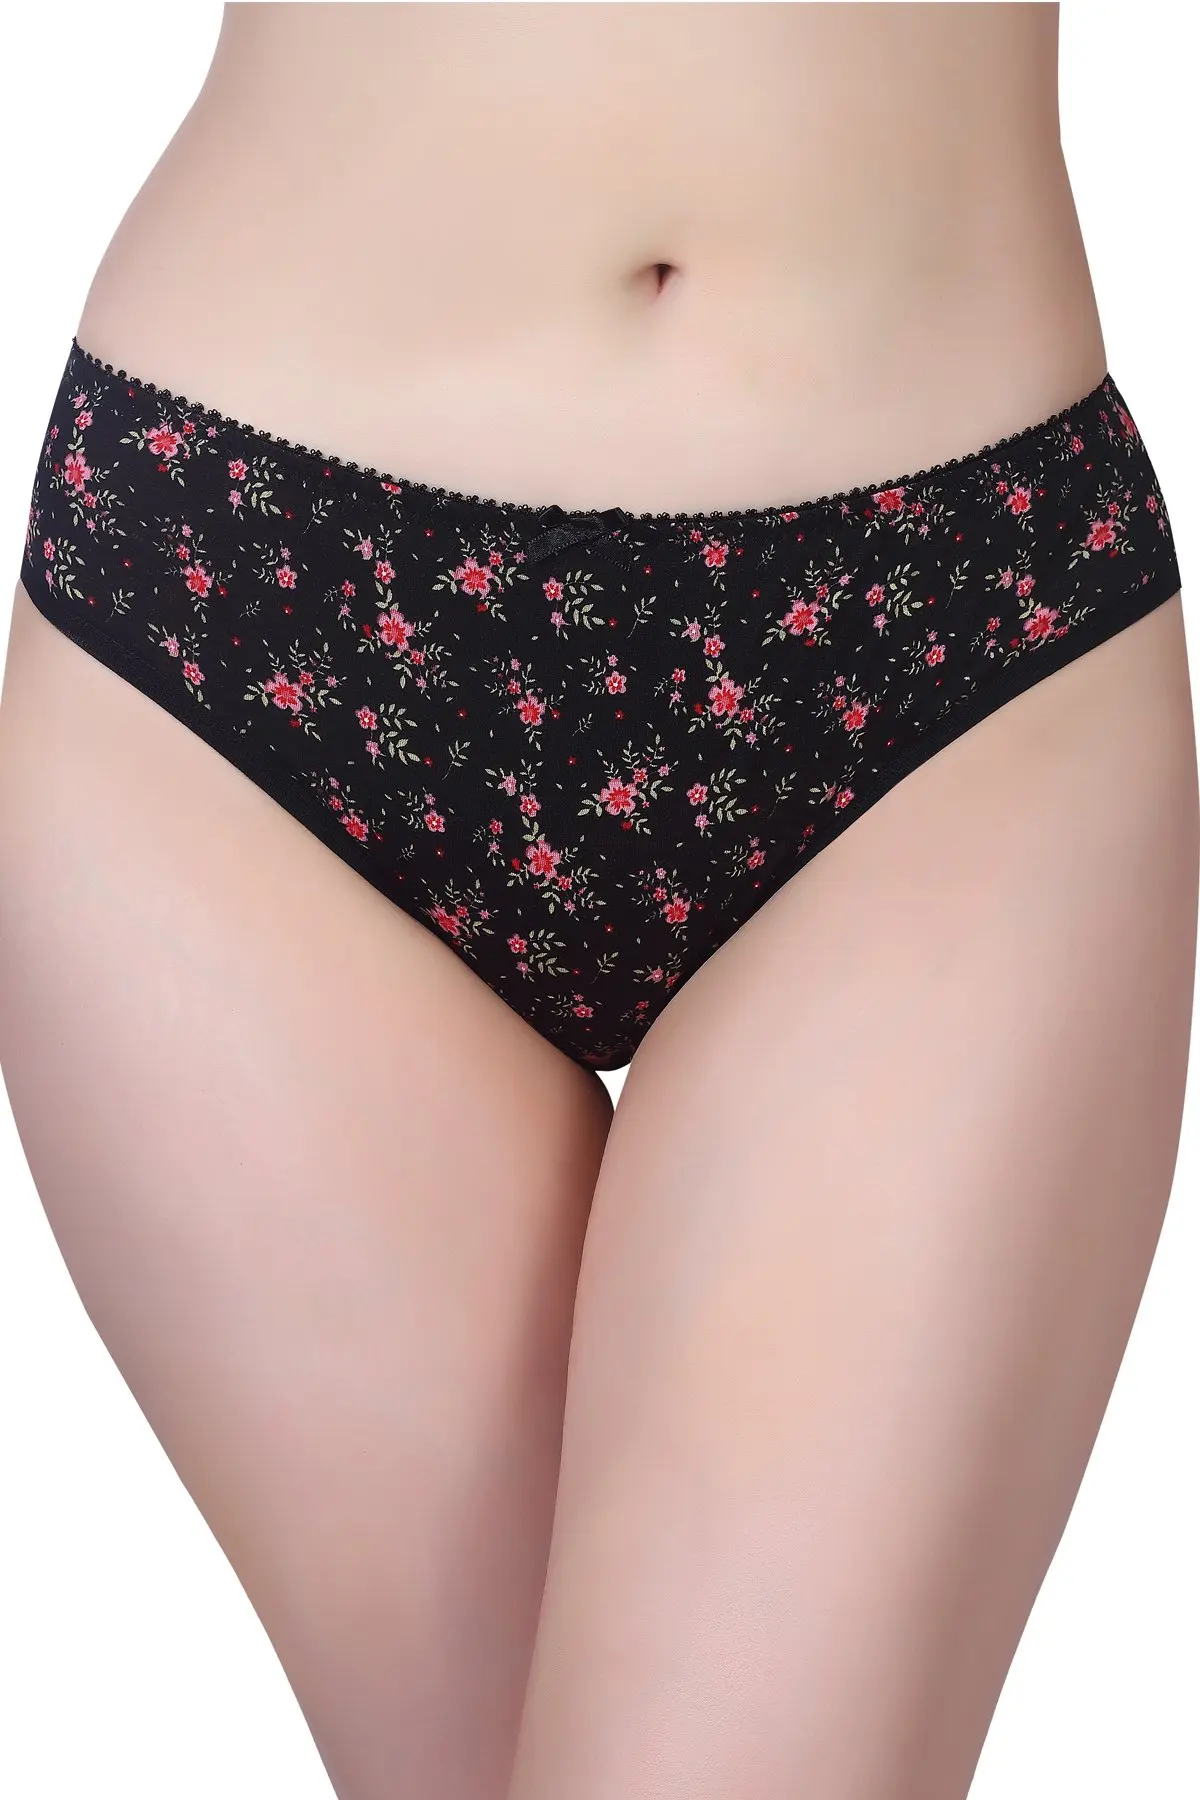 Bloomers - Spanx power shorts and power panties are back